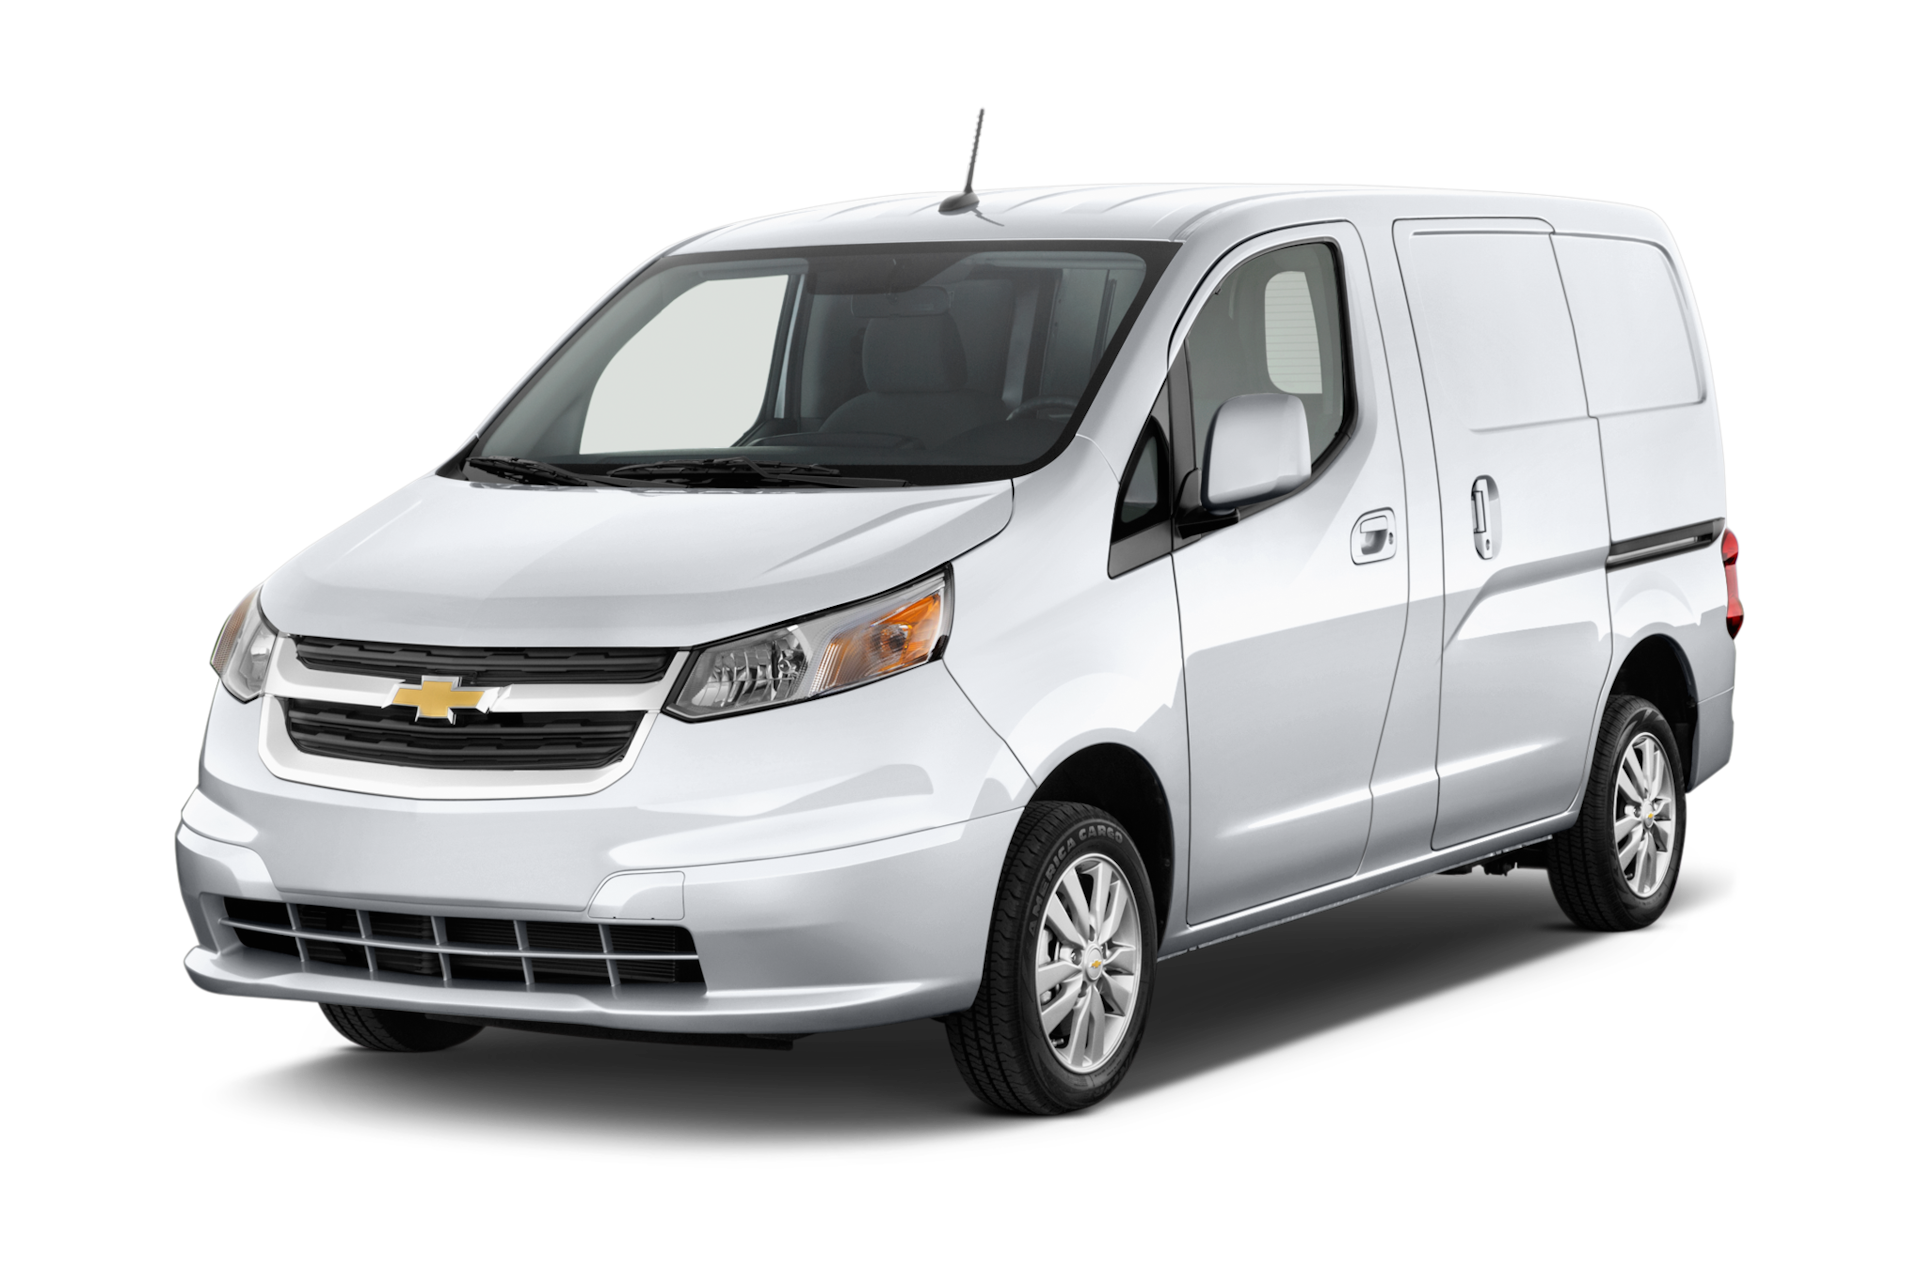 2017 Chevrolet City Express Prices, Reviews, and Photos - MotorTrend